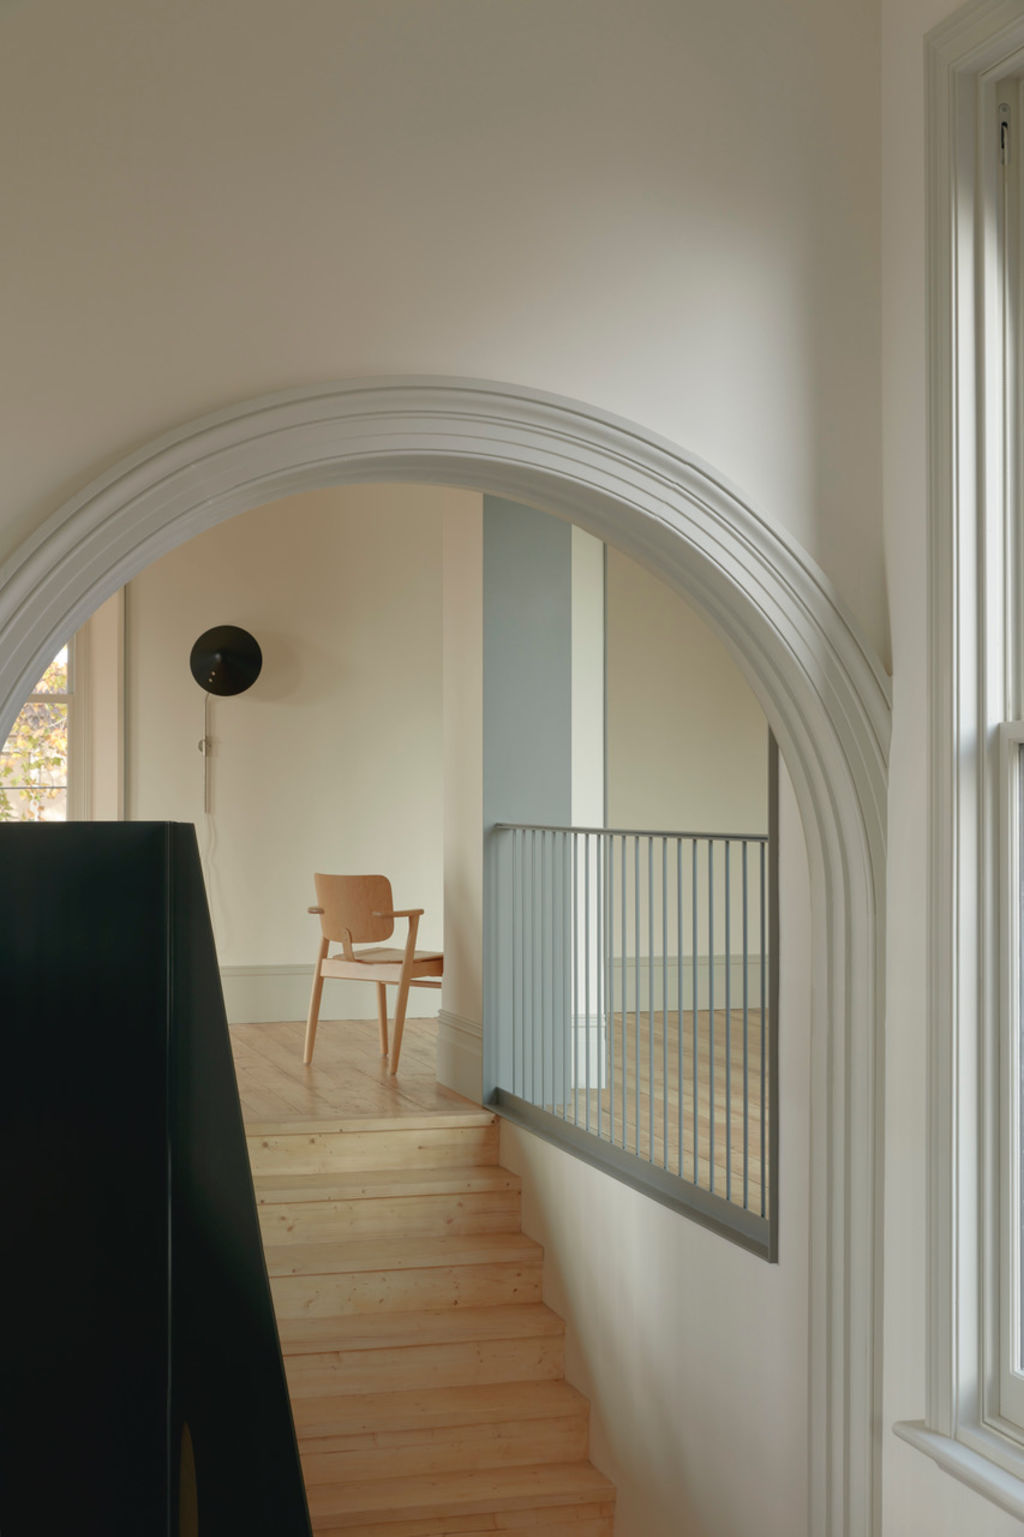 Thick plate steel was fabricated into a statement stair bannister under a Victorian arch. Photo: Tom Ross